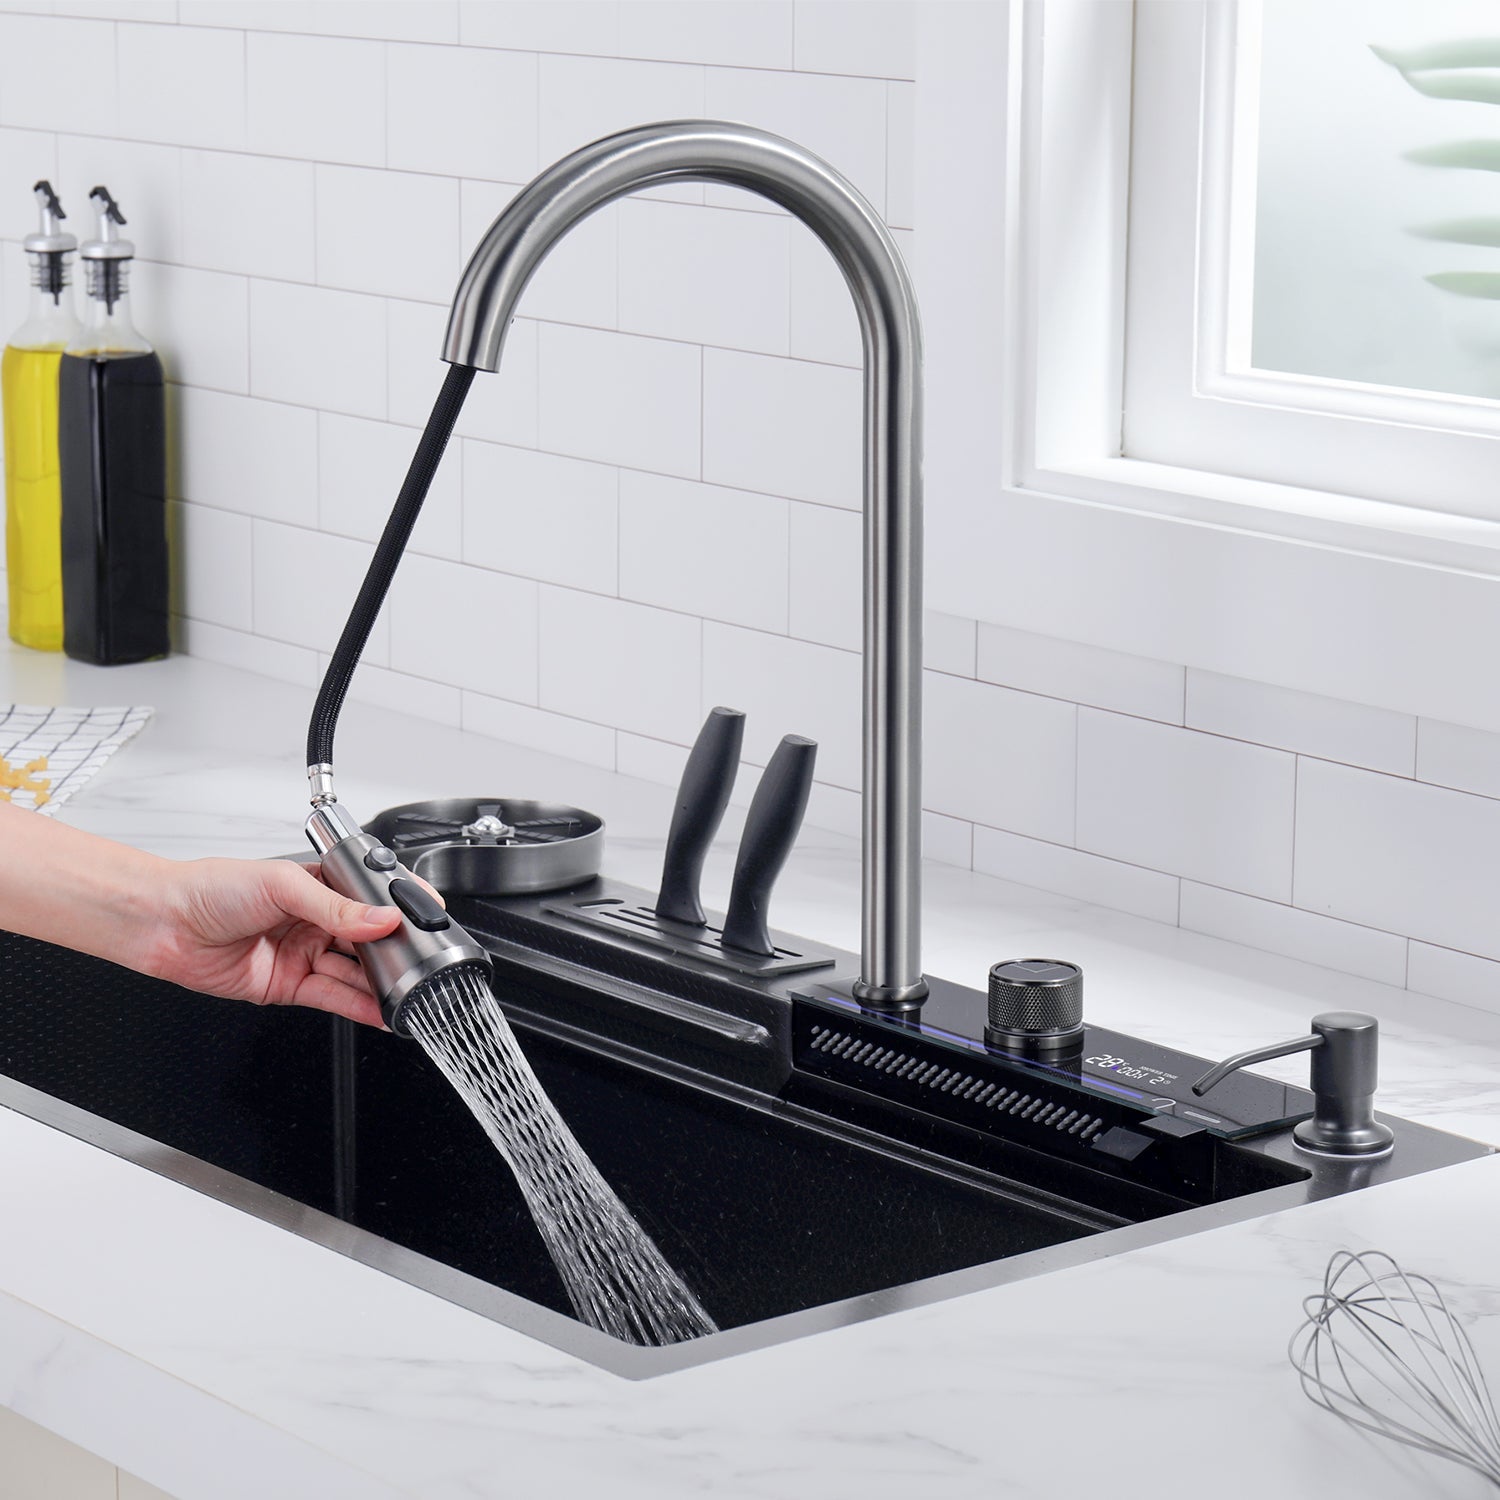 Lefton Latest Waterfall Workstation Kitchen Sink Set with LED Lighting Temperature Display